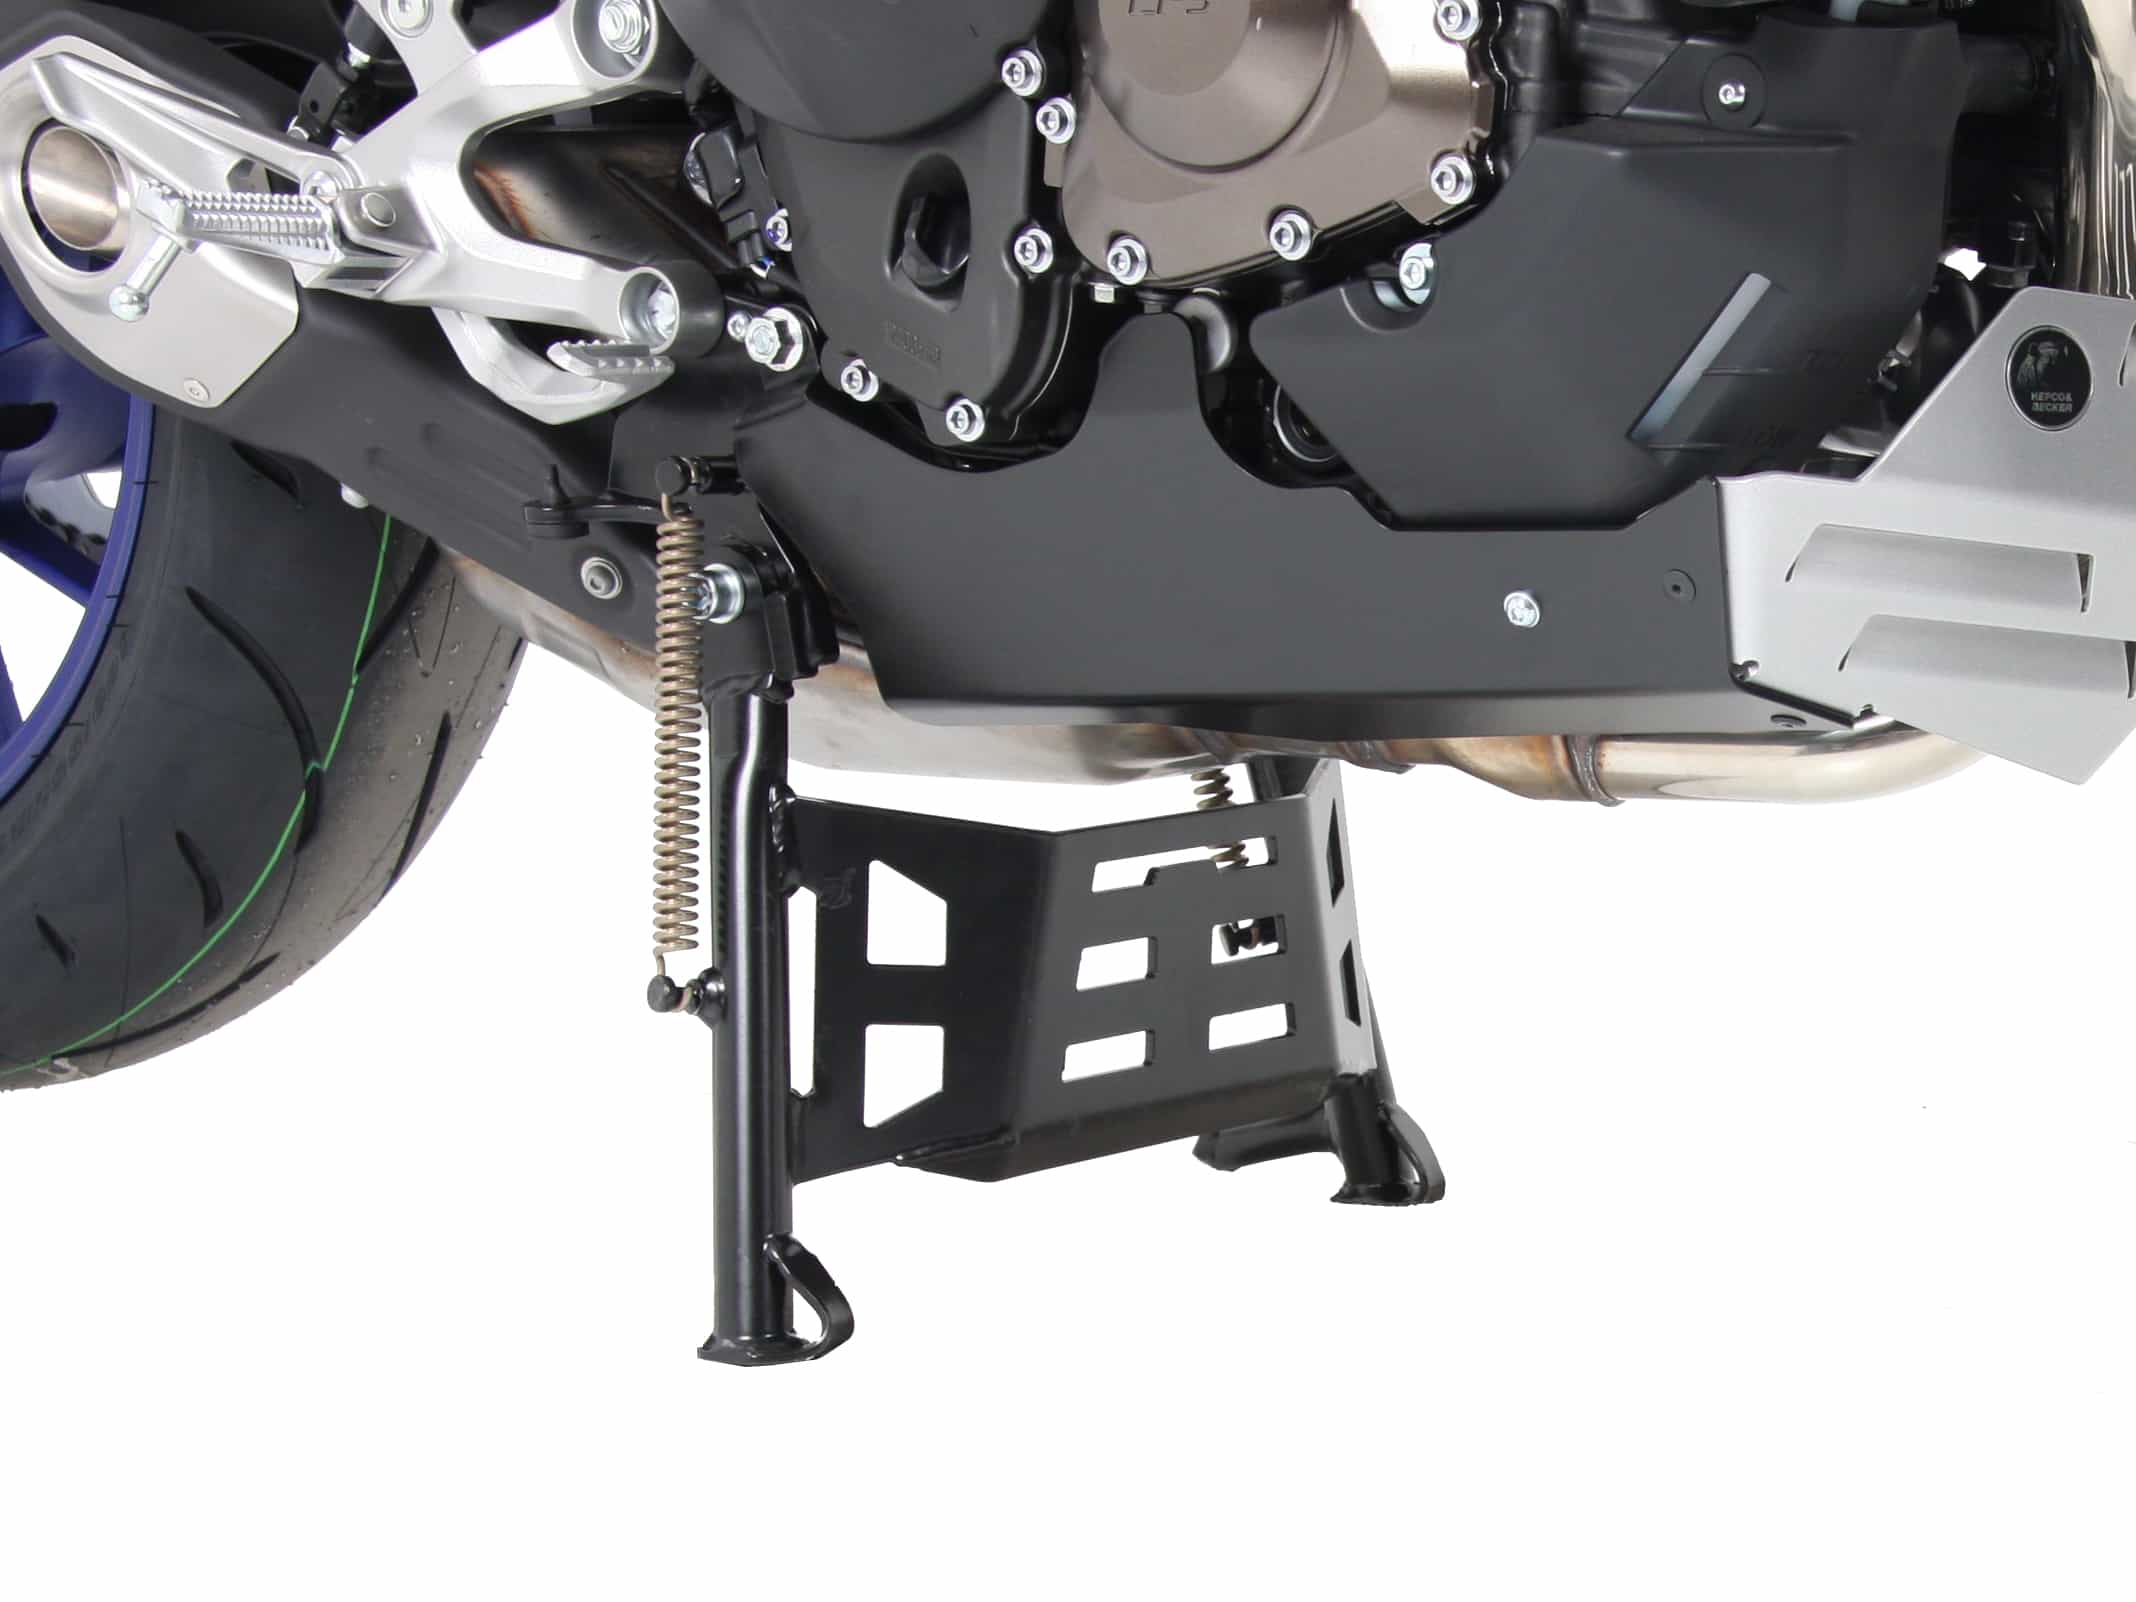 Center stand for Yamaha MT-09 SP (2018-2020)